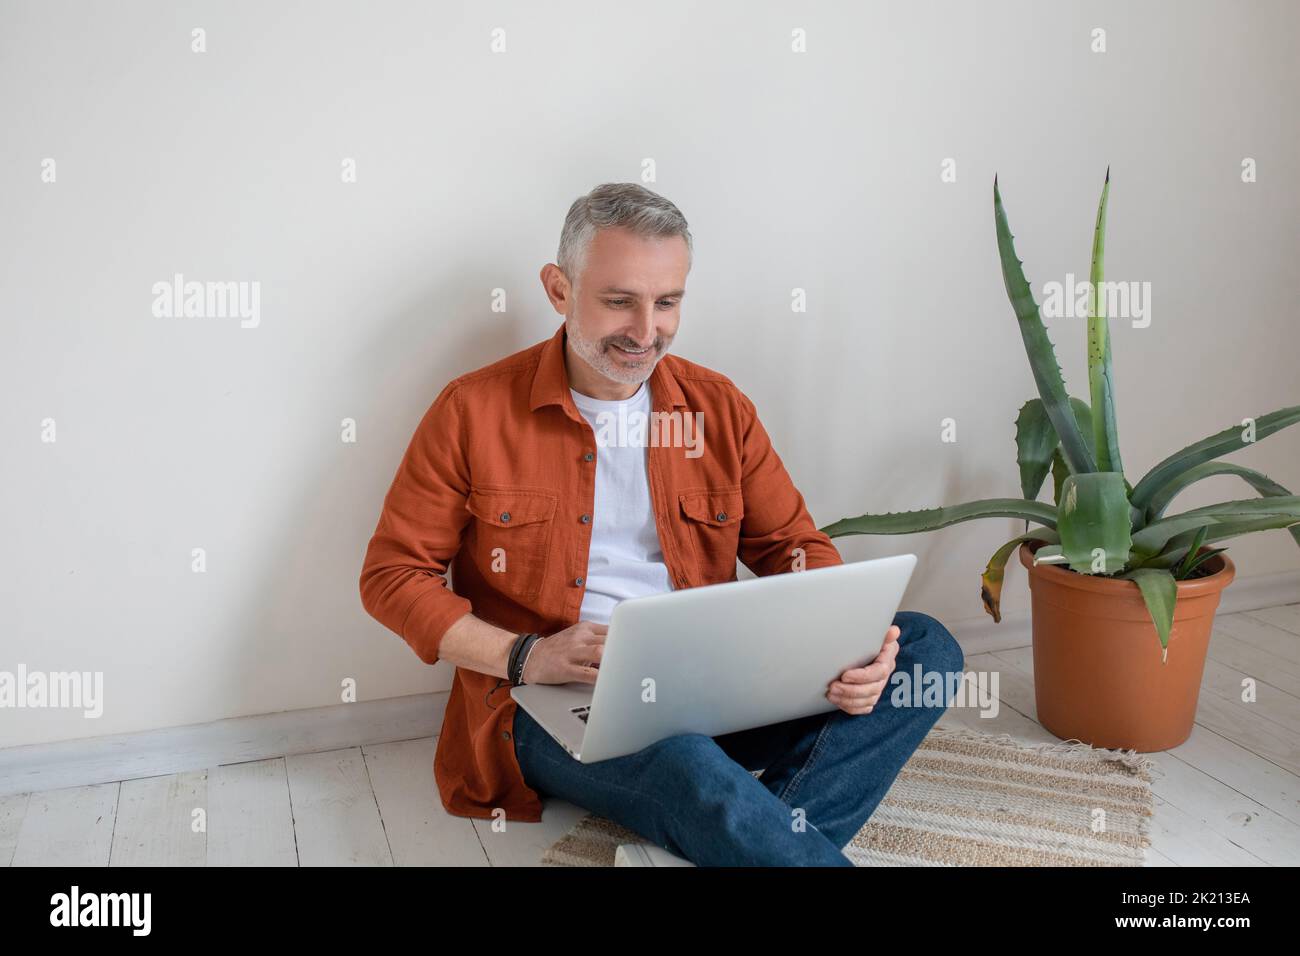 Man in terracotta shirt sitting on the floor with a laptop in hands Stock Photo